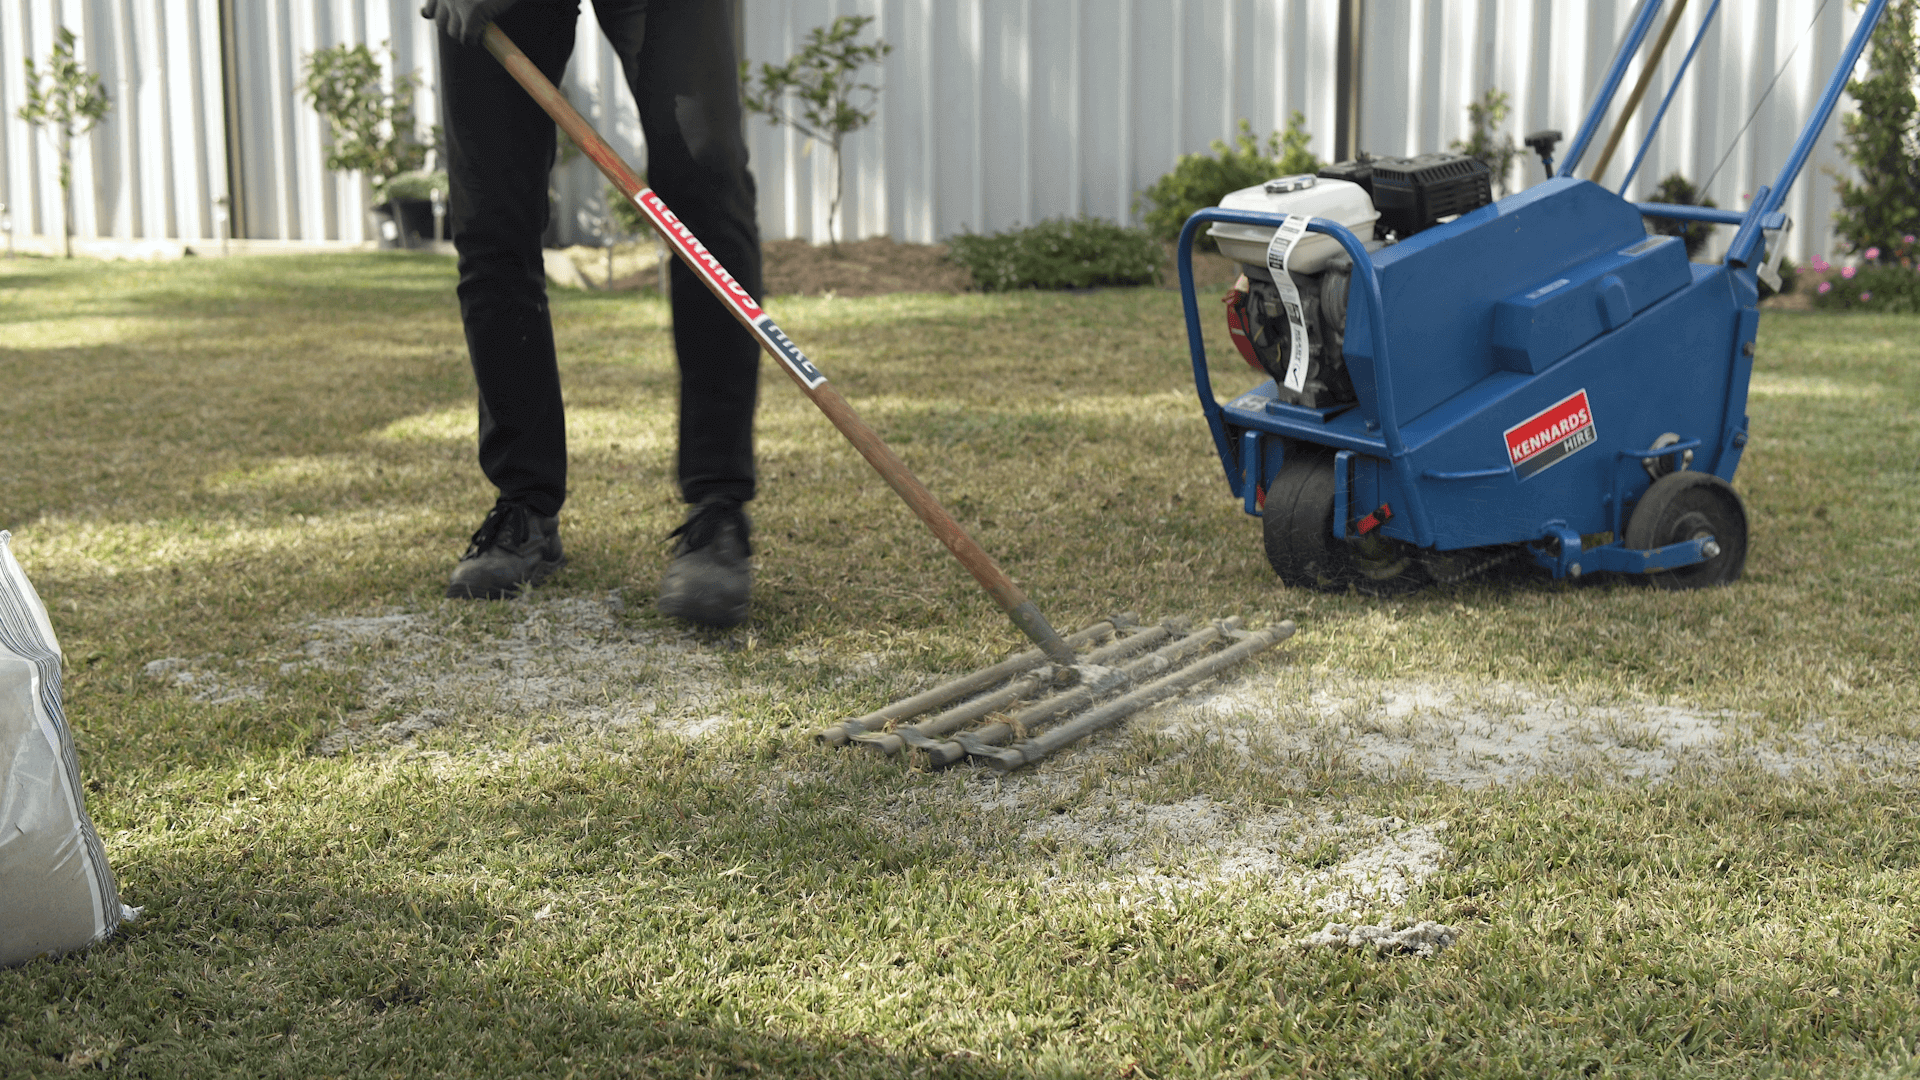 Rake the cores of the lawn